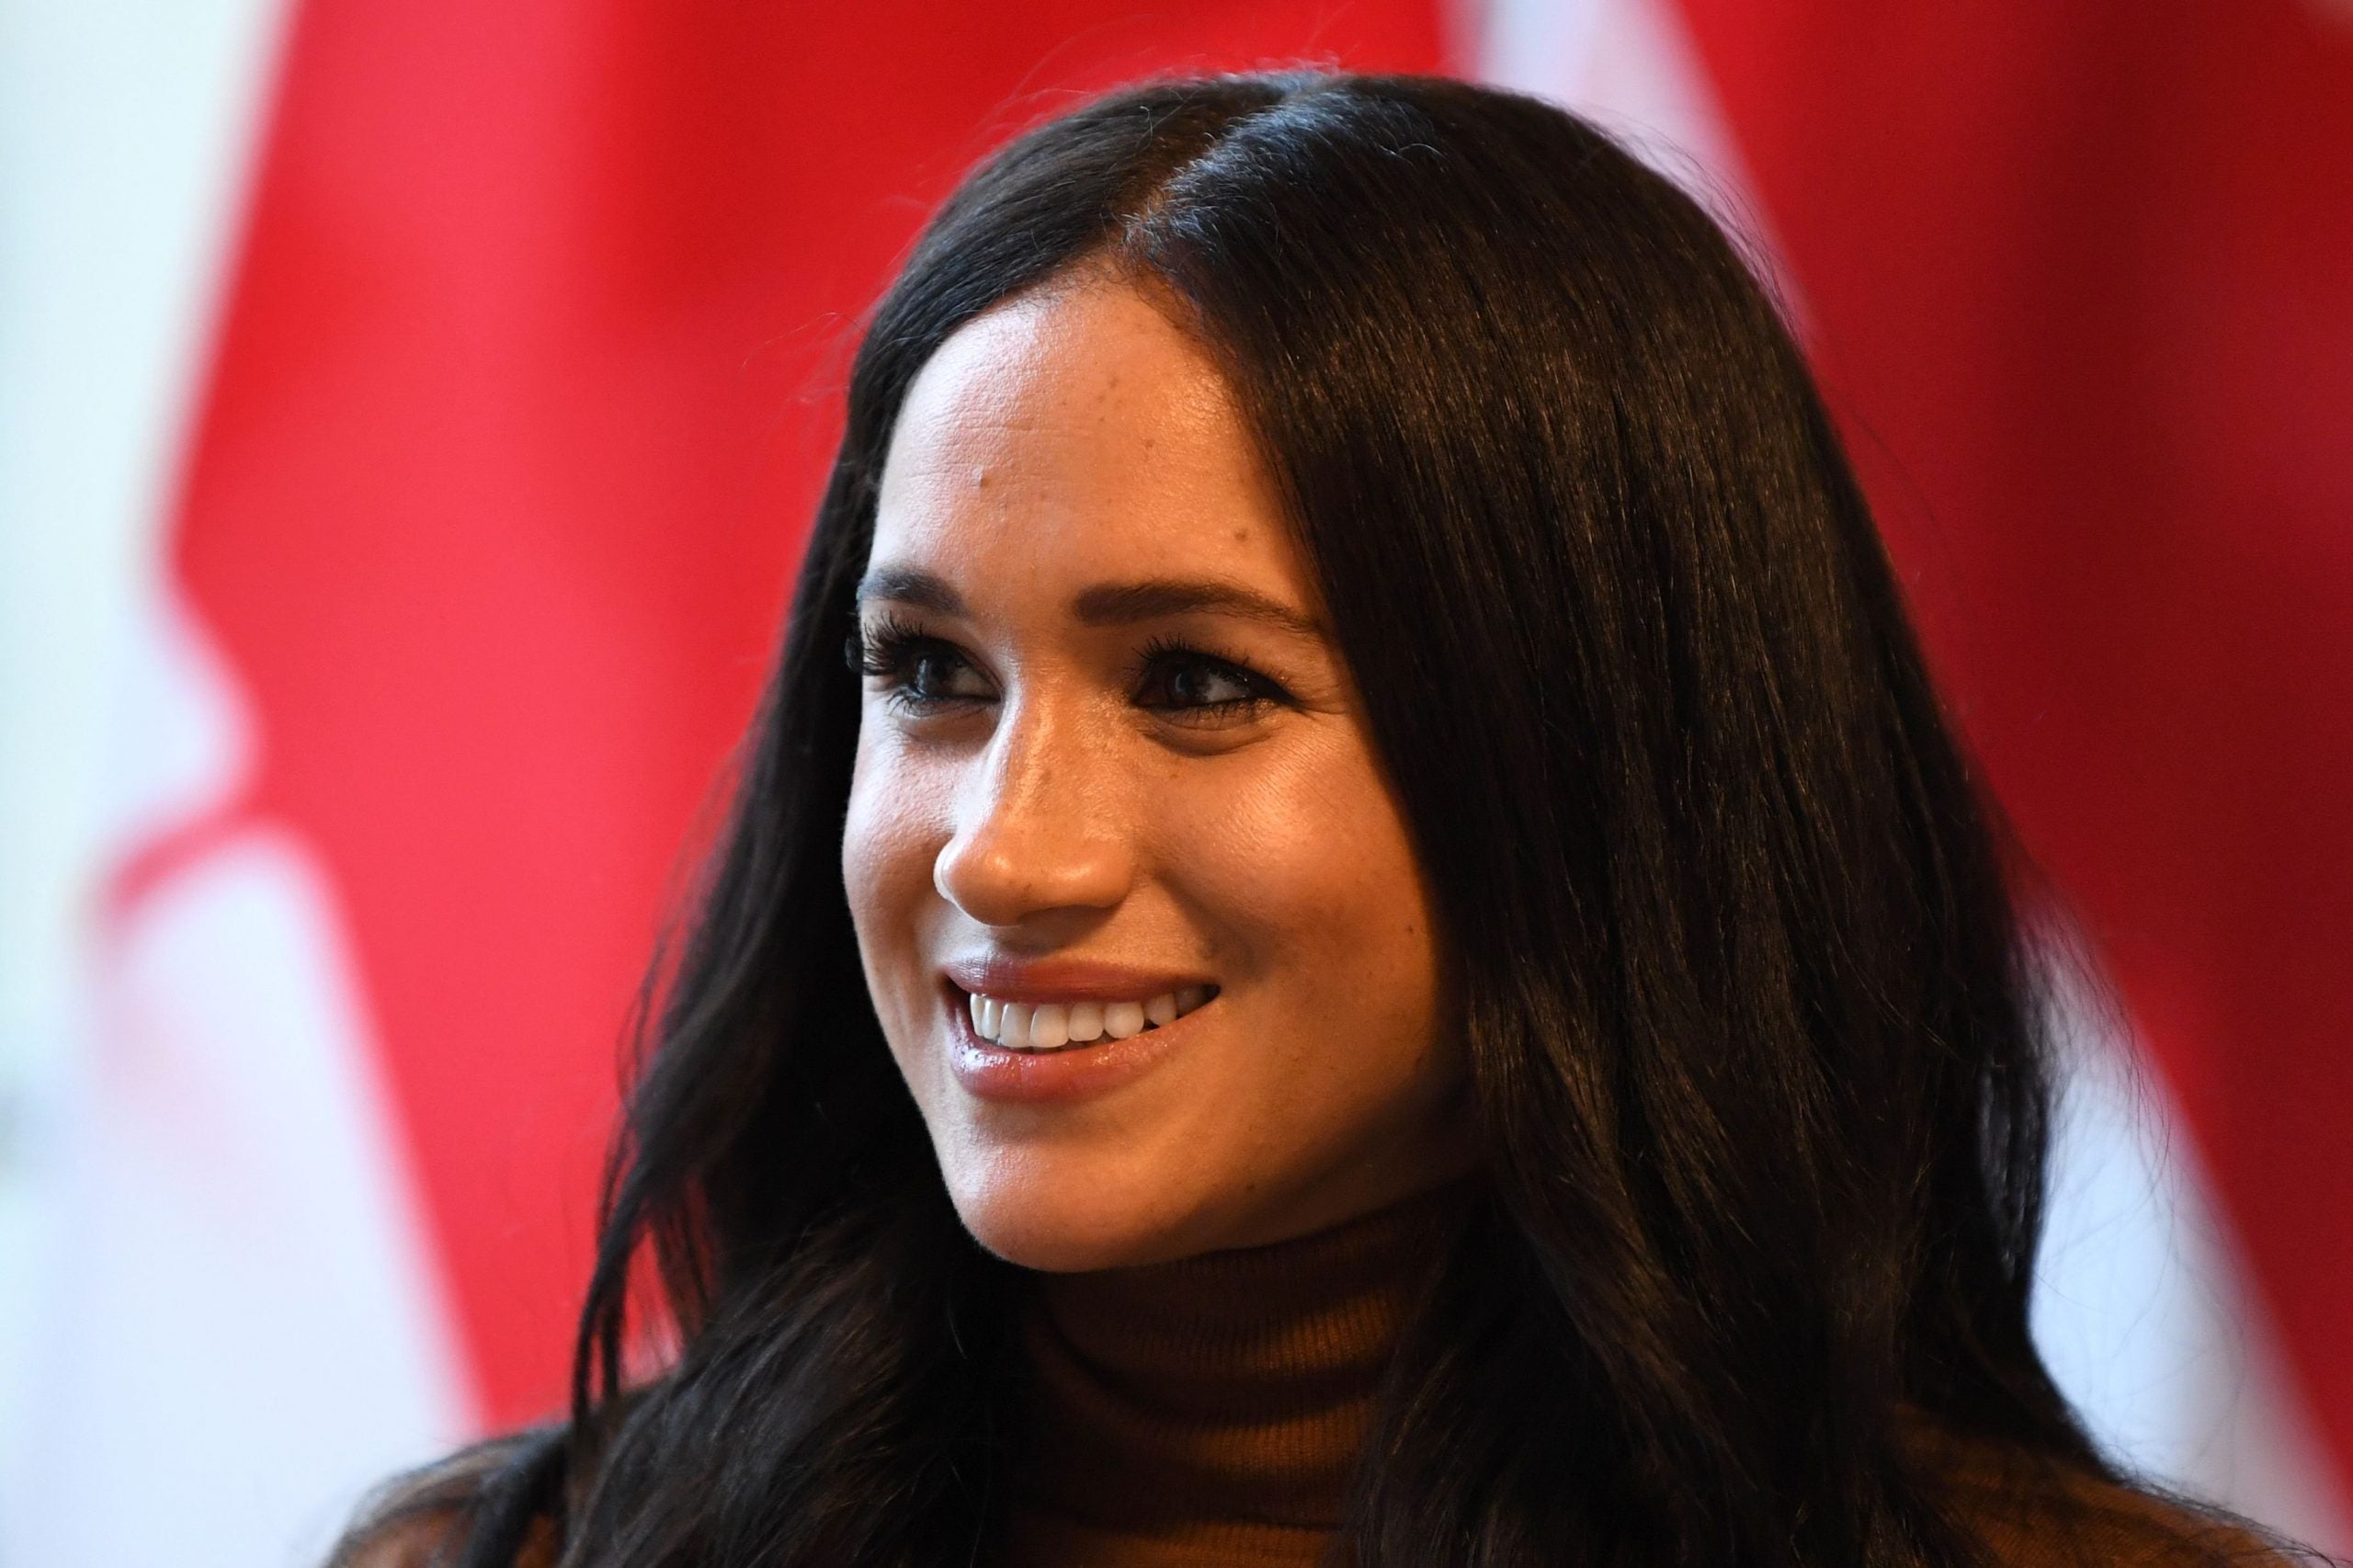 Meghan Markle Opens Up About Her ‘Unbearable Grief’ After Suffering A Miscarriage